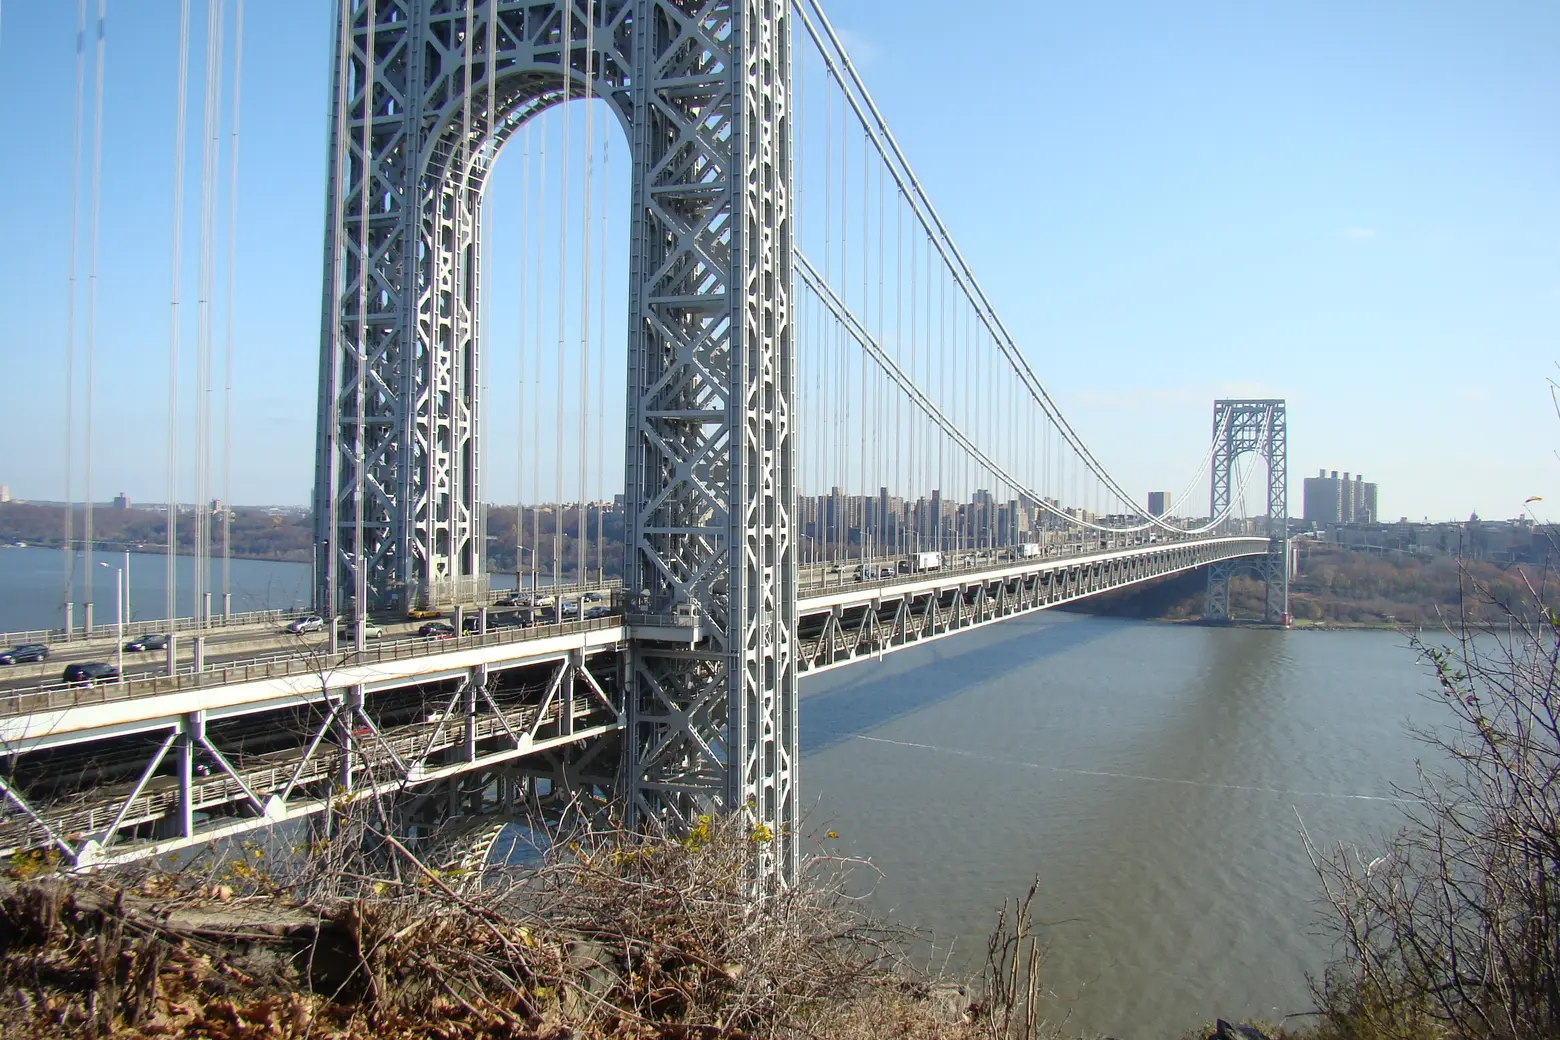 The new year will bring toll and fare hikes for NY-NJ bridges and tunnels